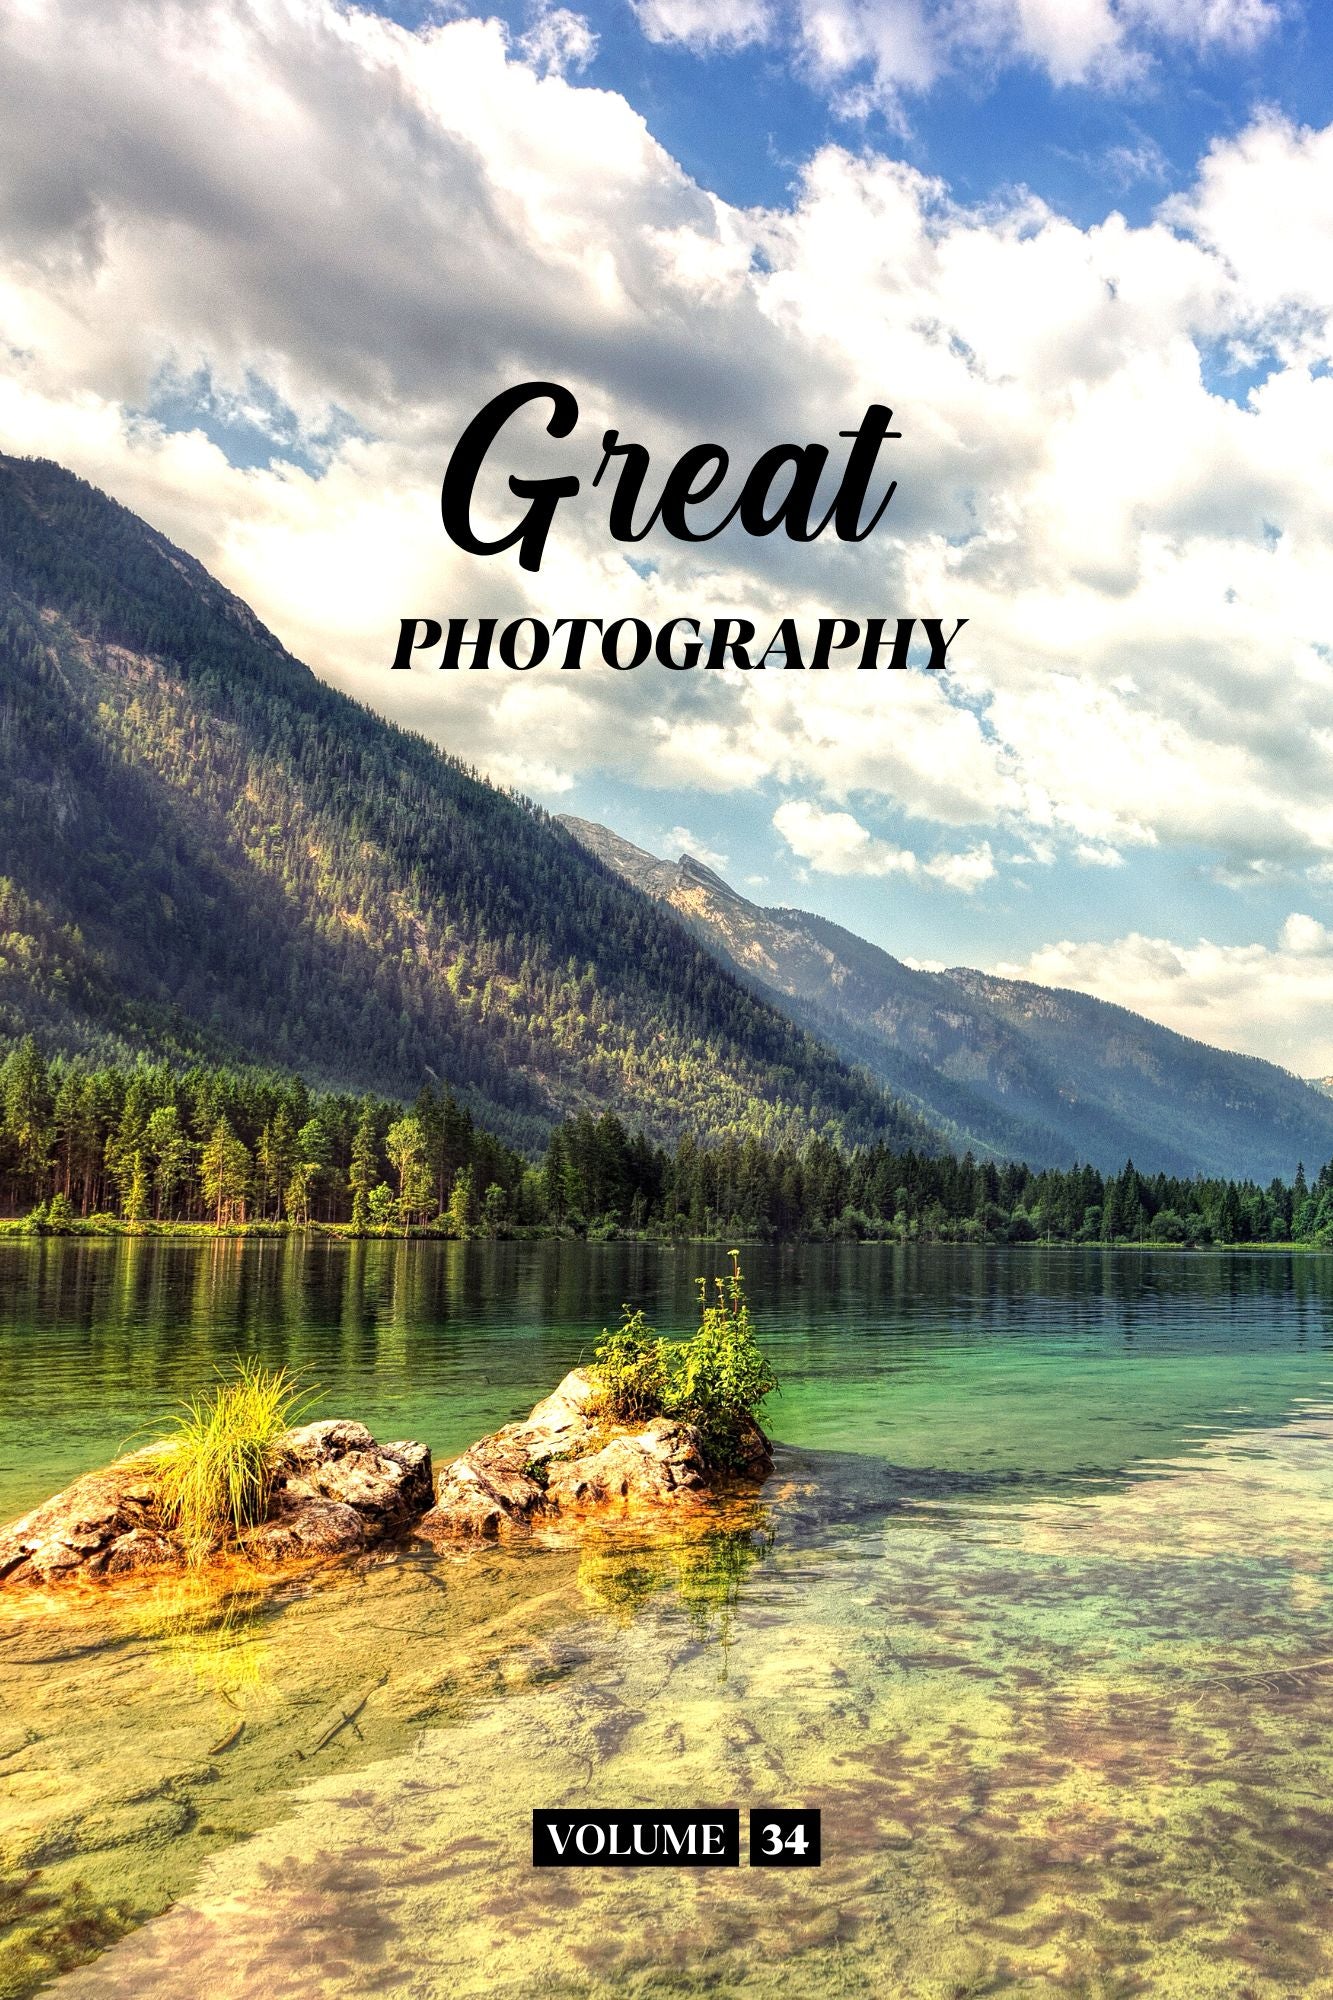 Great Photography Volume 34 (Physical Book Pre-Order)